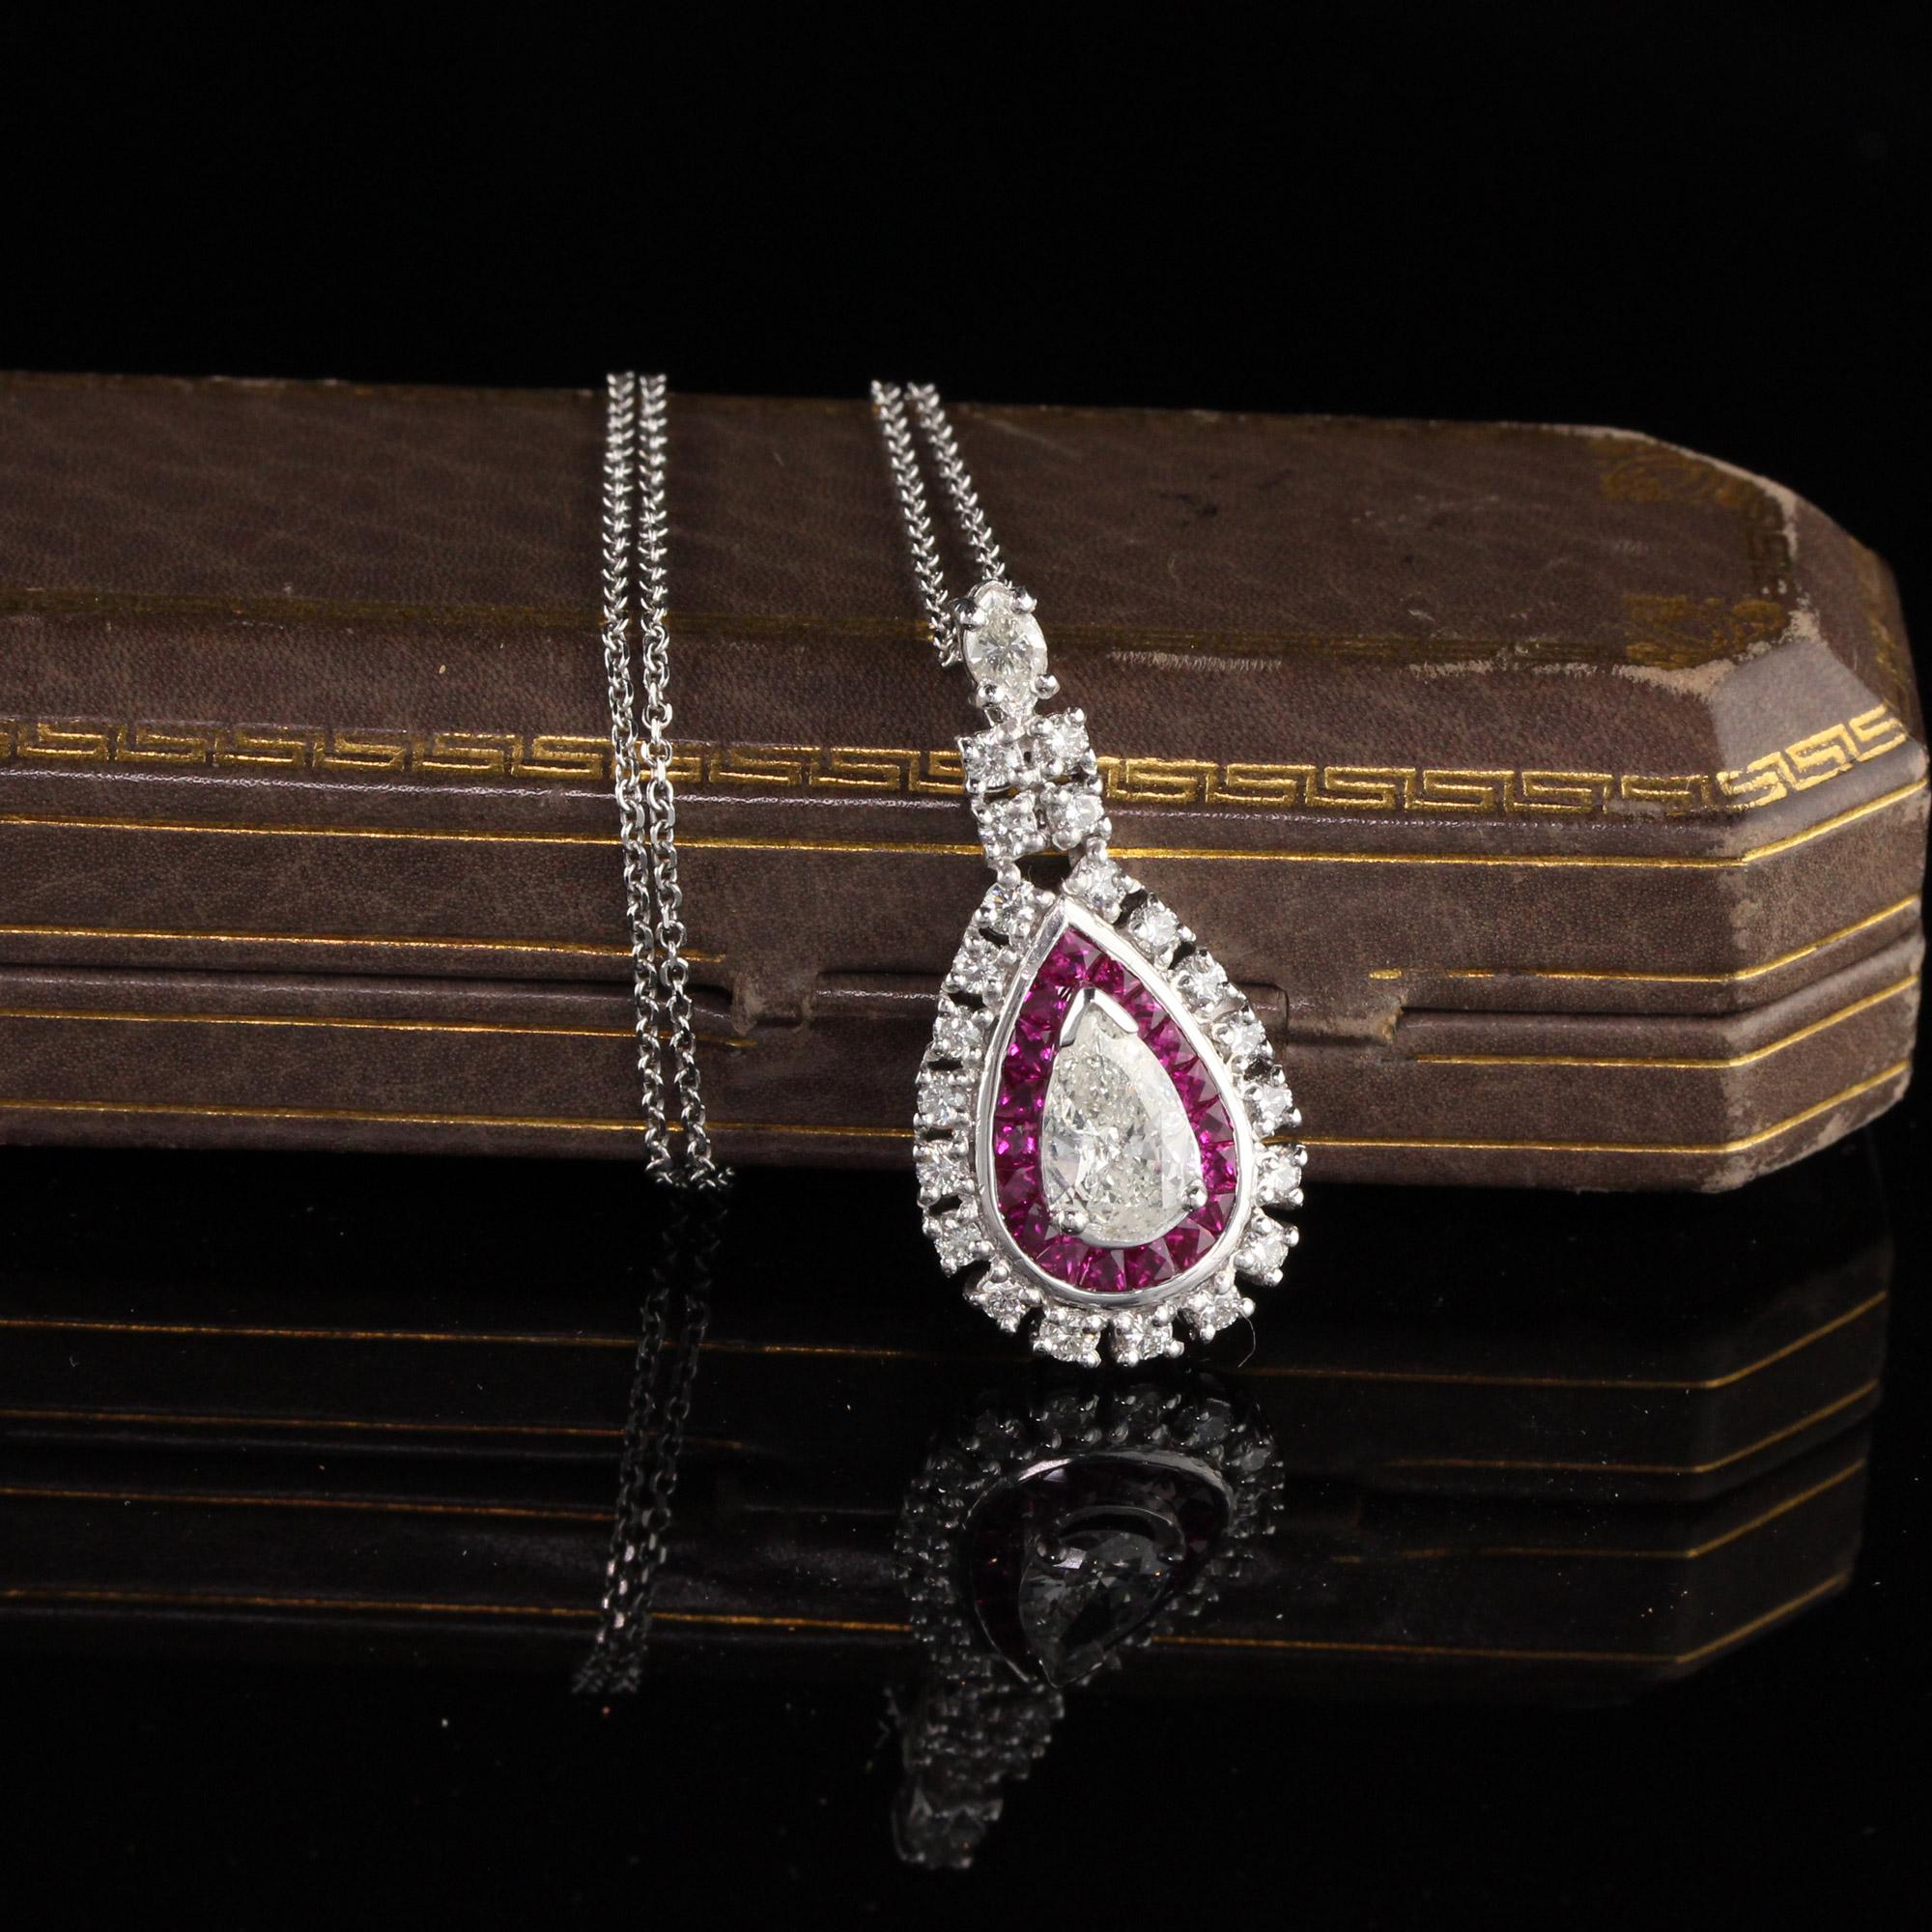 Gorgeous Diamond and Ruby pendant with a 1.00 CT Pear Shape Diamond in the center

Metal: Platinum

Weight: 10.3 Grams

Total Diamond Weight: Approximately 2.00 CTS

Center Diamond Weight: 1.00 CTS

Center Diamond Color: H

Center Diamond Clarity: